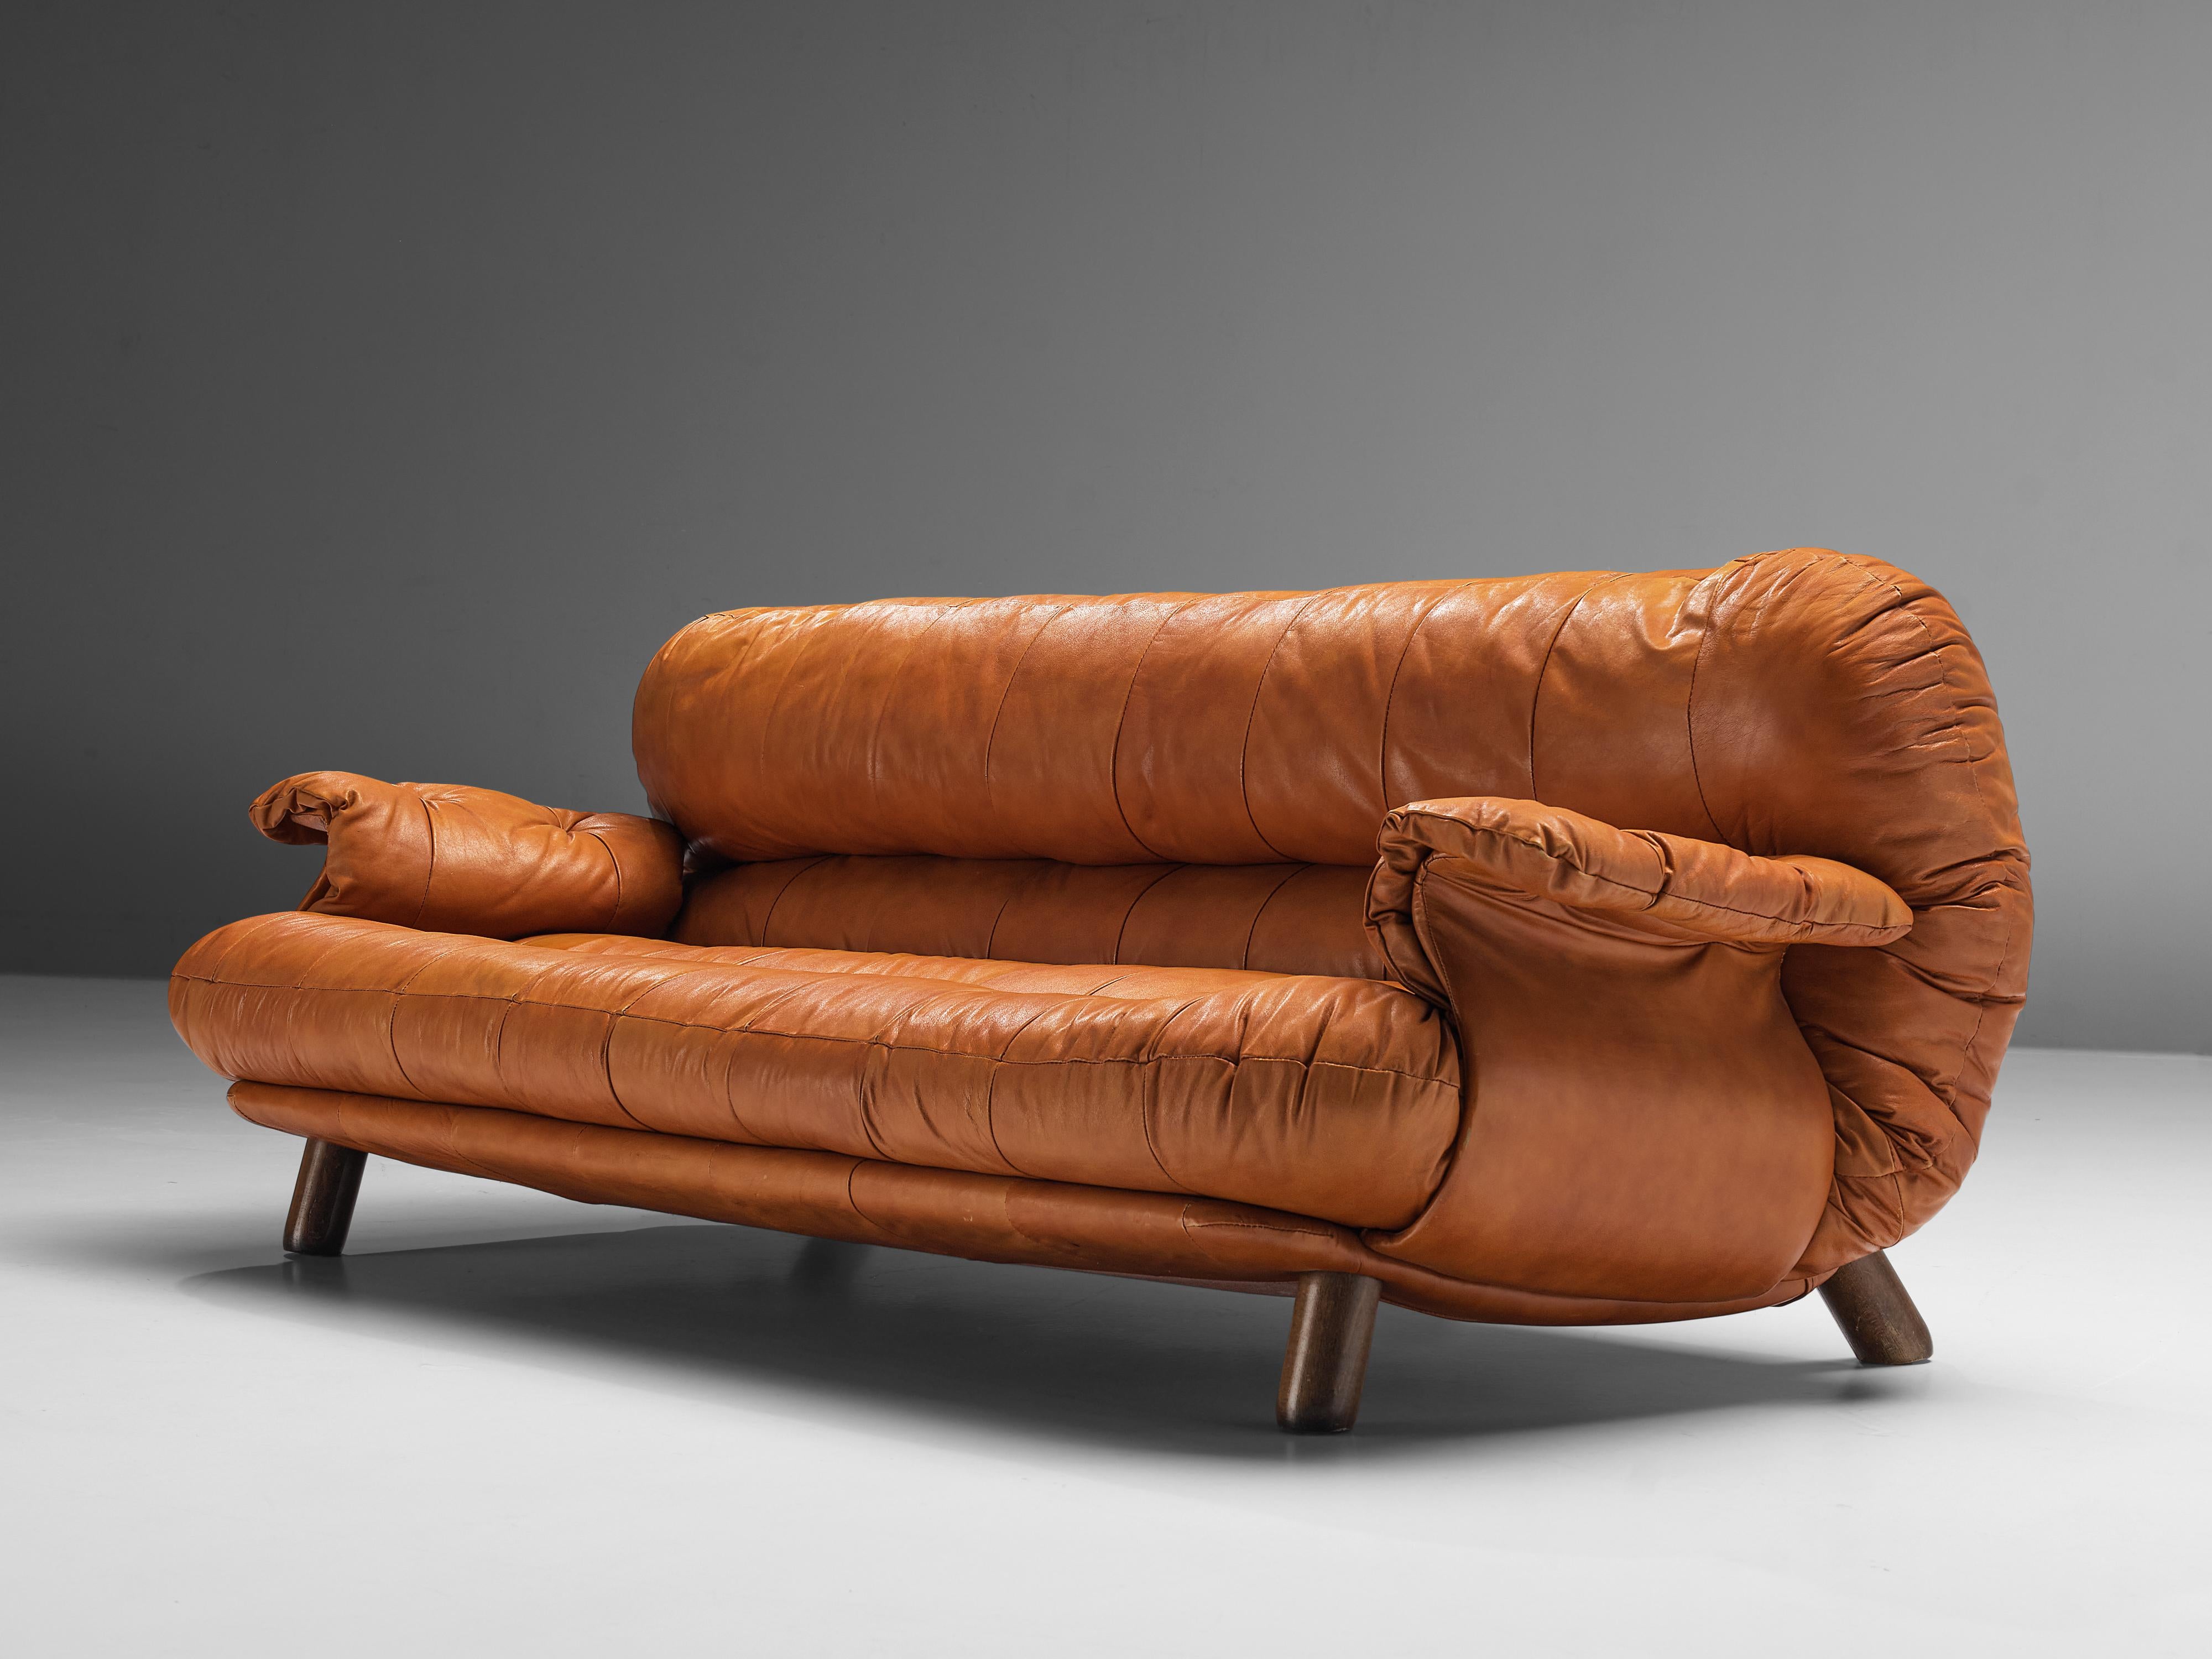 E. Cobianchi for Insa Italy, sofa, leather, wood, Italy, 1970s 

An Italian sofa in cognac leather by E. Cobianchi for Insa. The sofa features a thick, tufted seat and backrest. The armrests are curved in an extravagant way, giving the impression